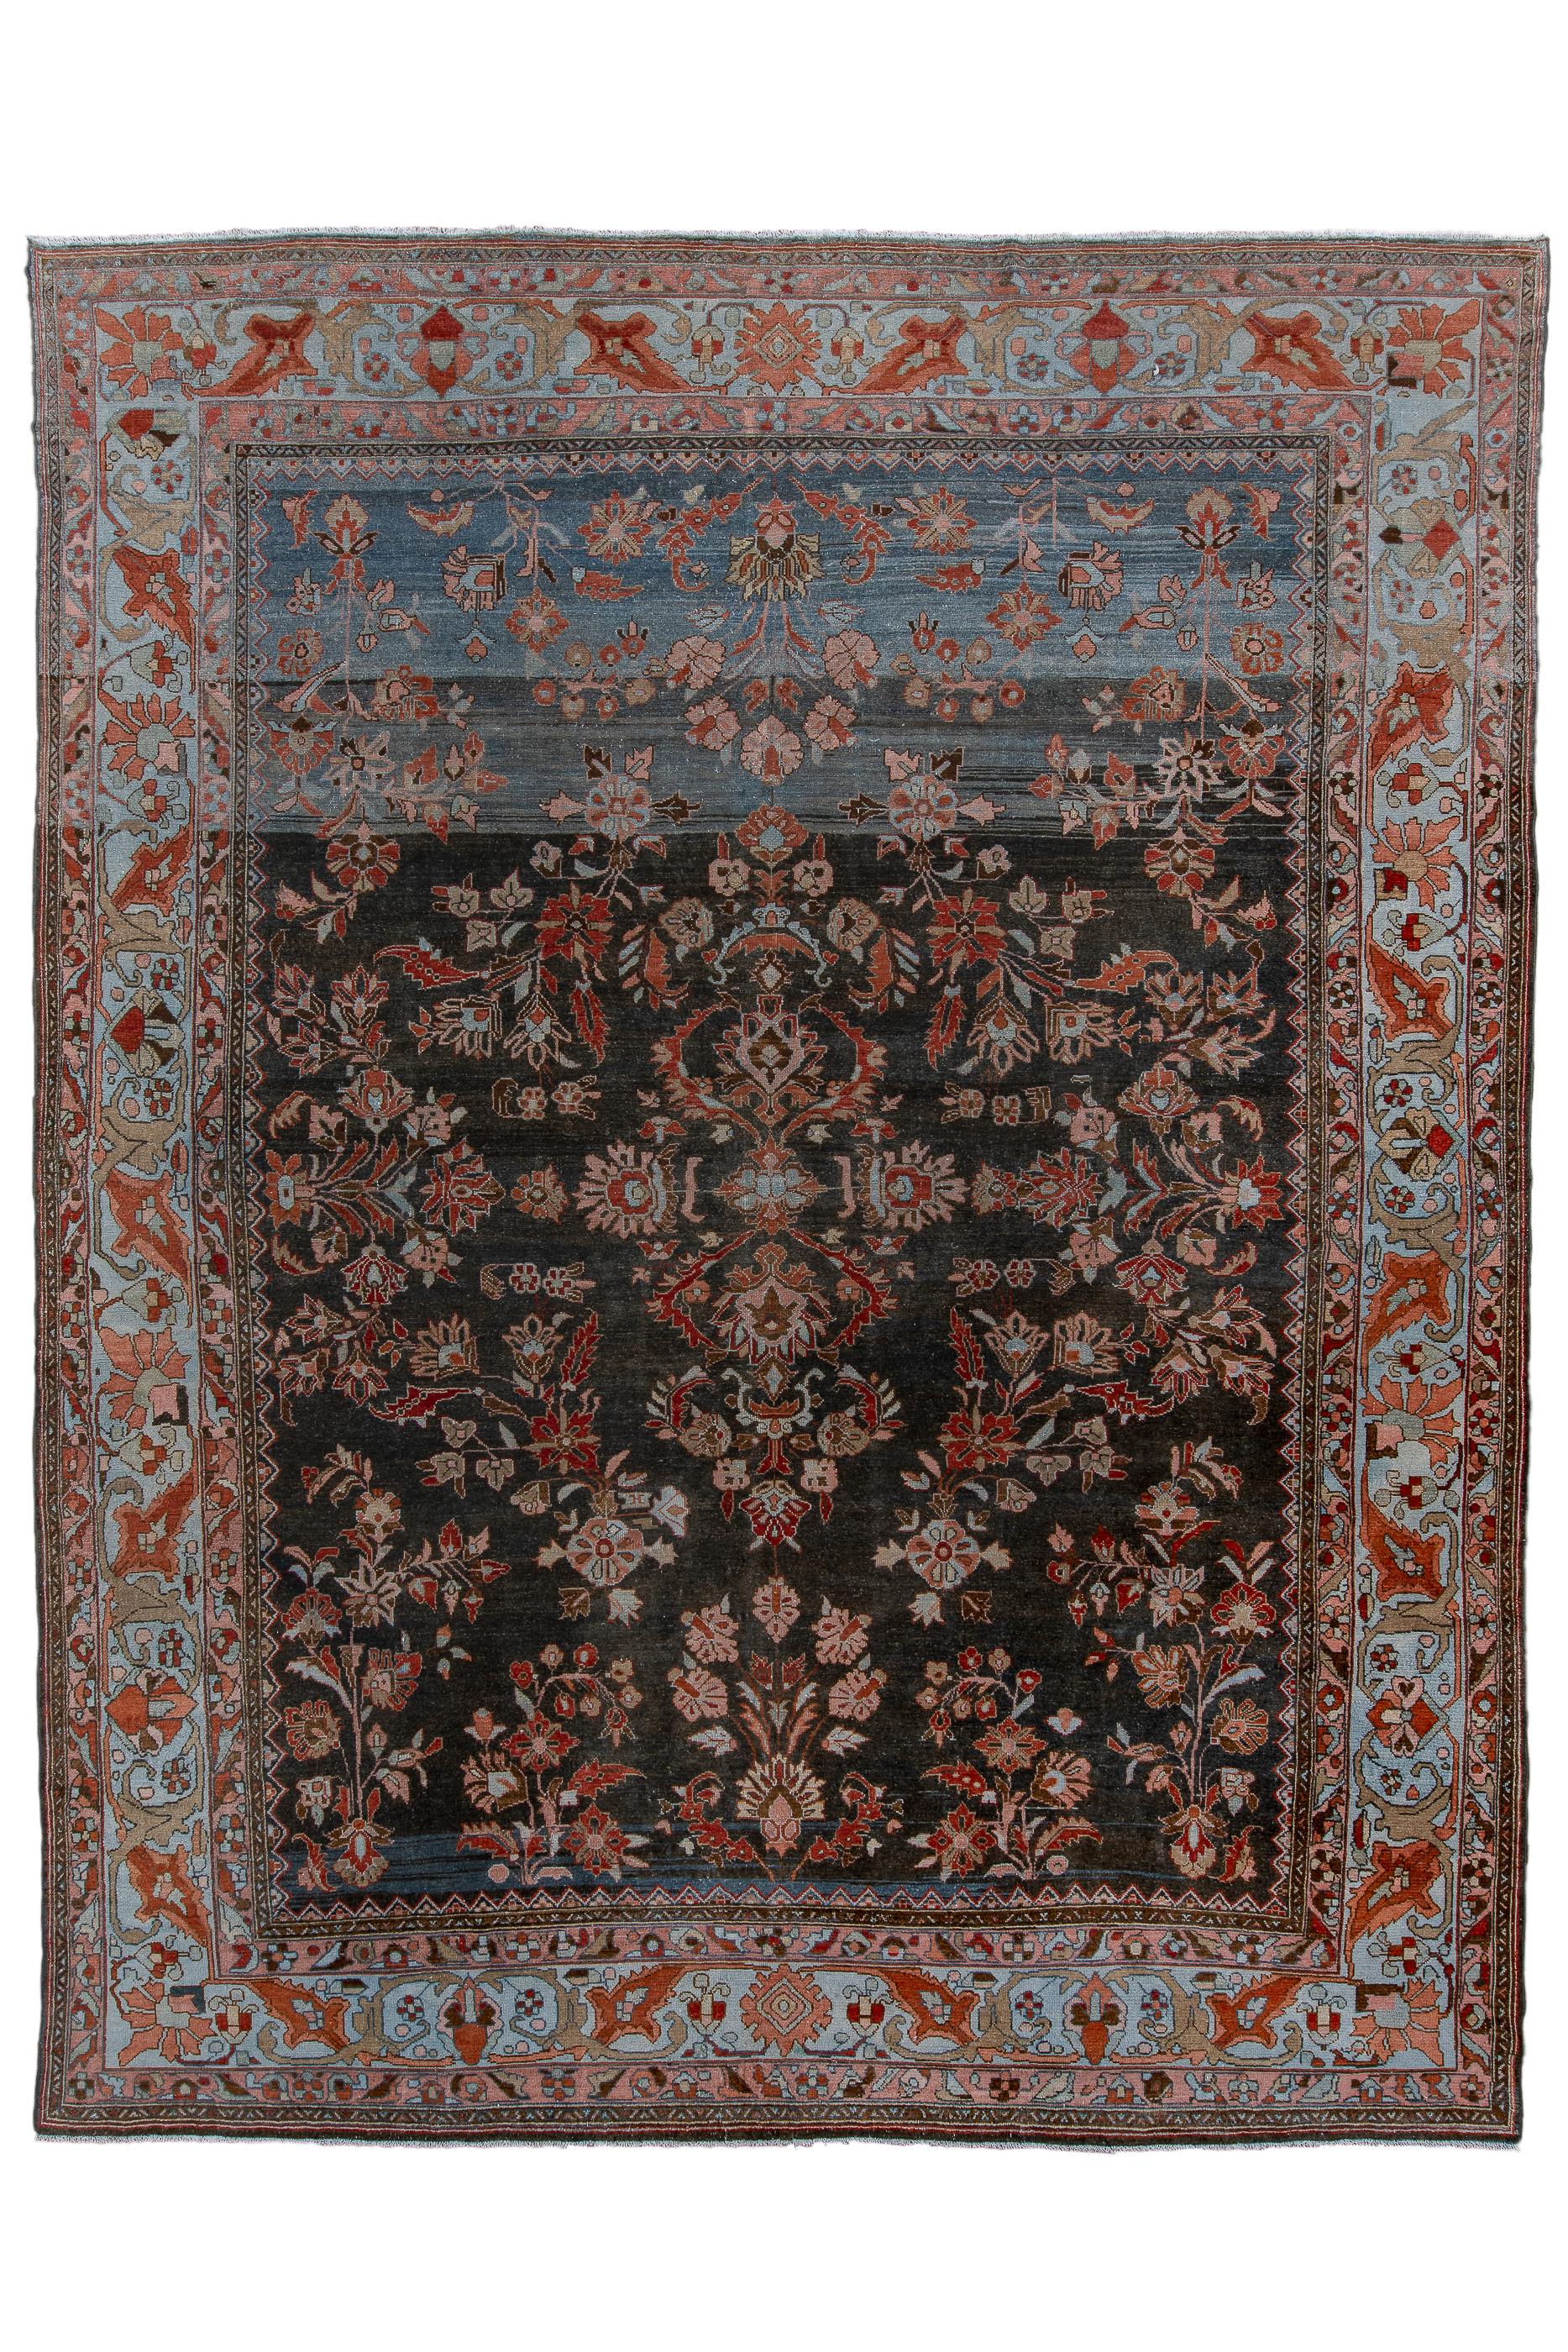 The midnite blue field abrashes to slate in the upper quarter of this village carpet from the Greater Hamadan Weaving Area.  The pattern of detached floral sprays and stems follows the popular “American Saruk” manner.  Pale blue main border with